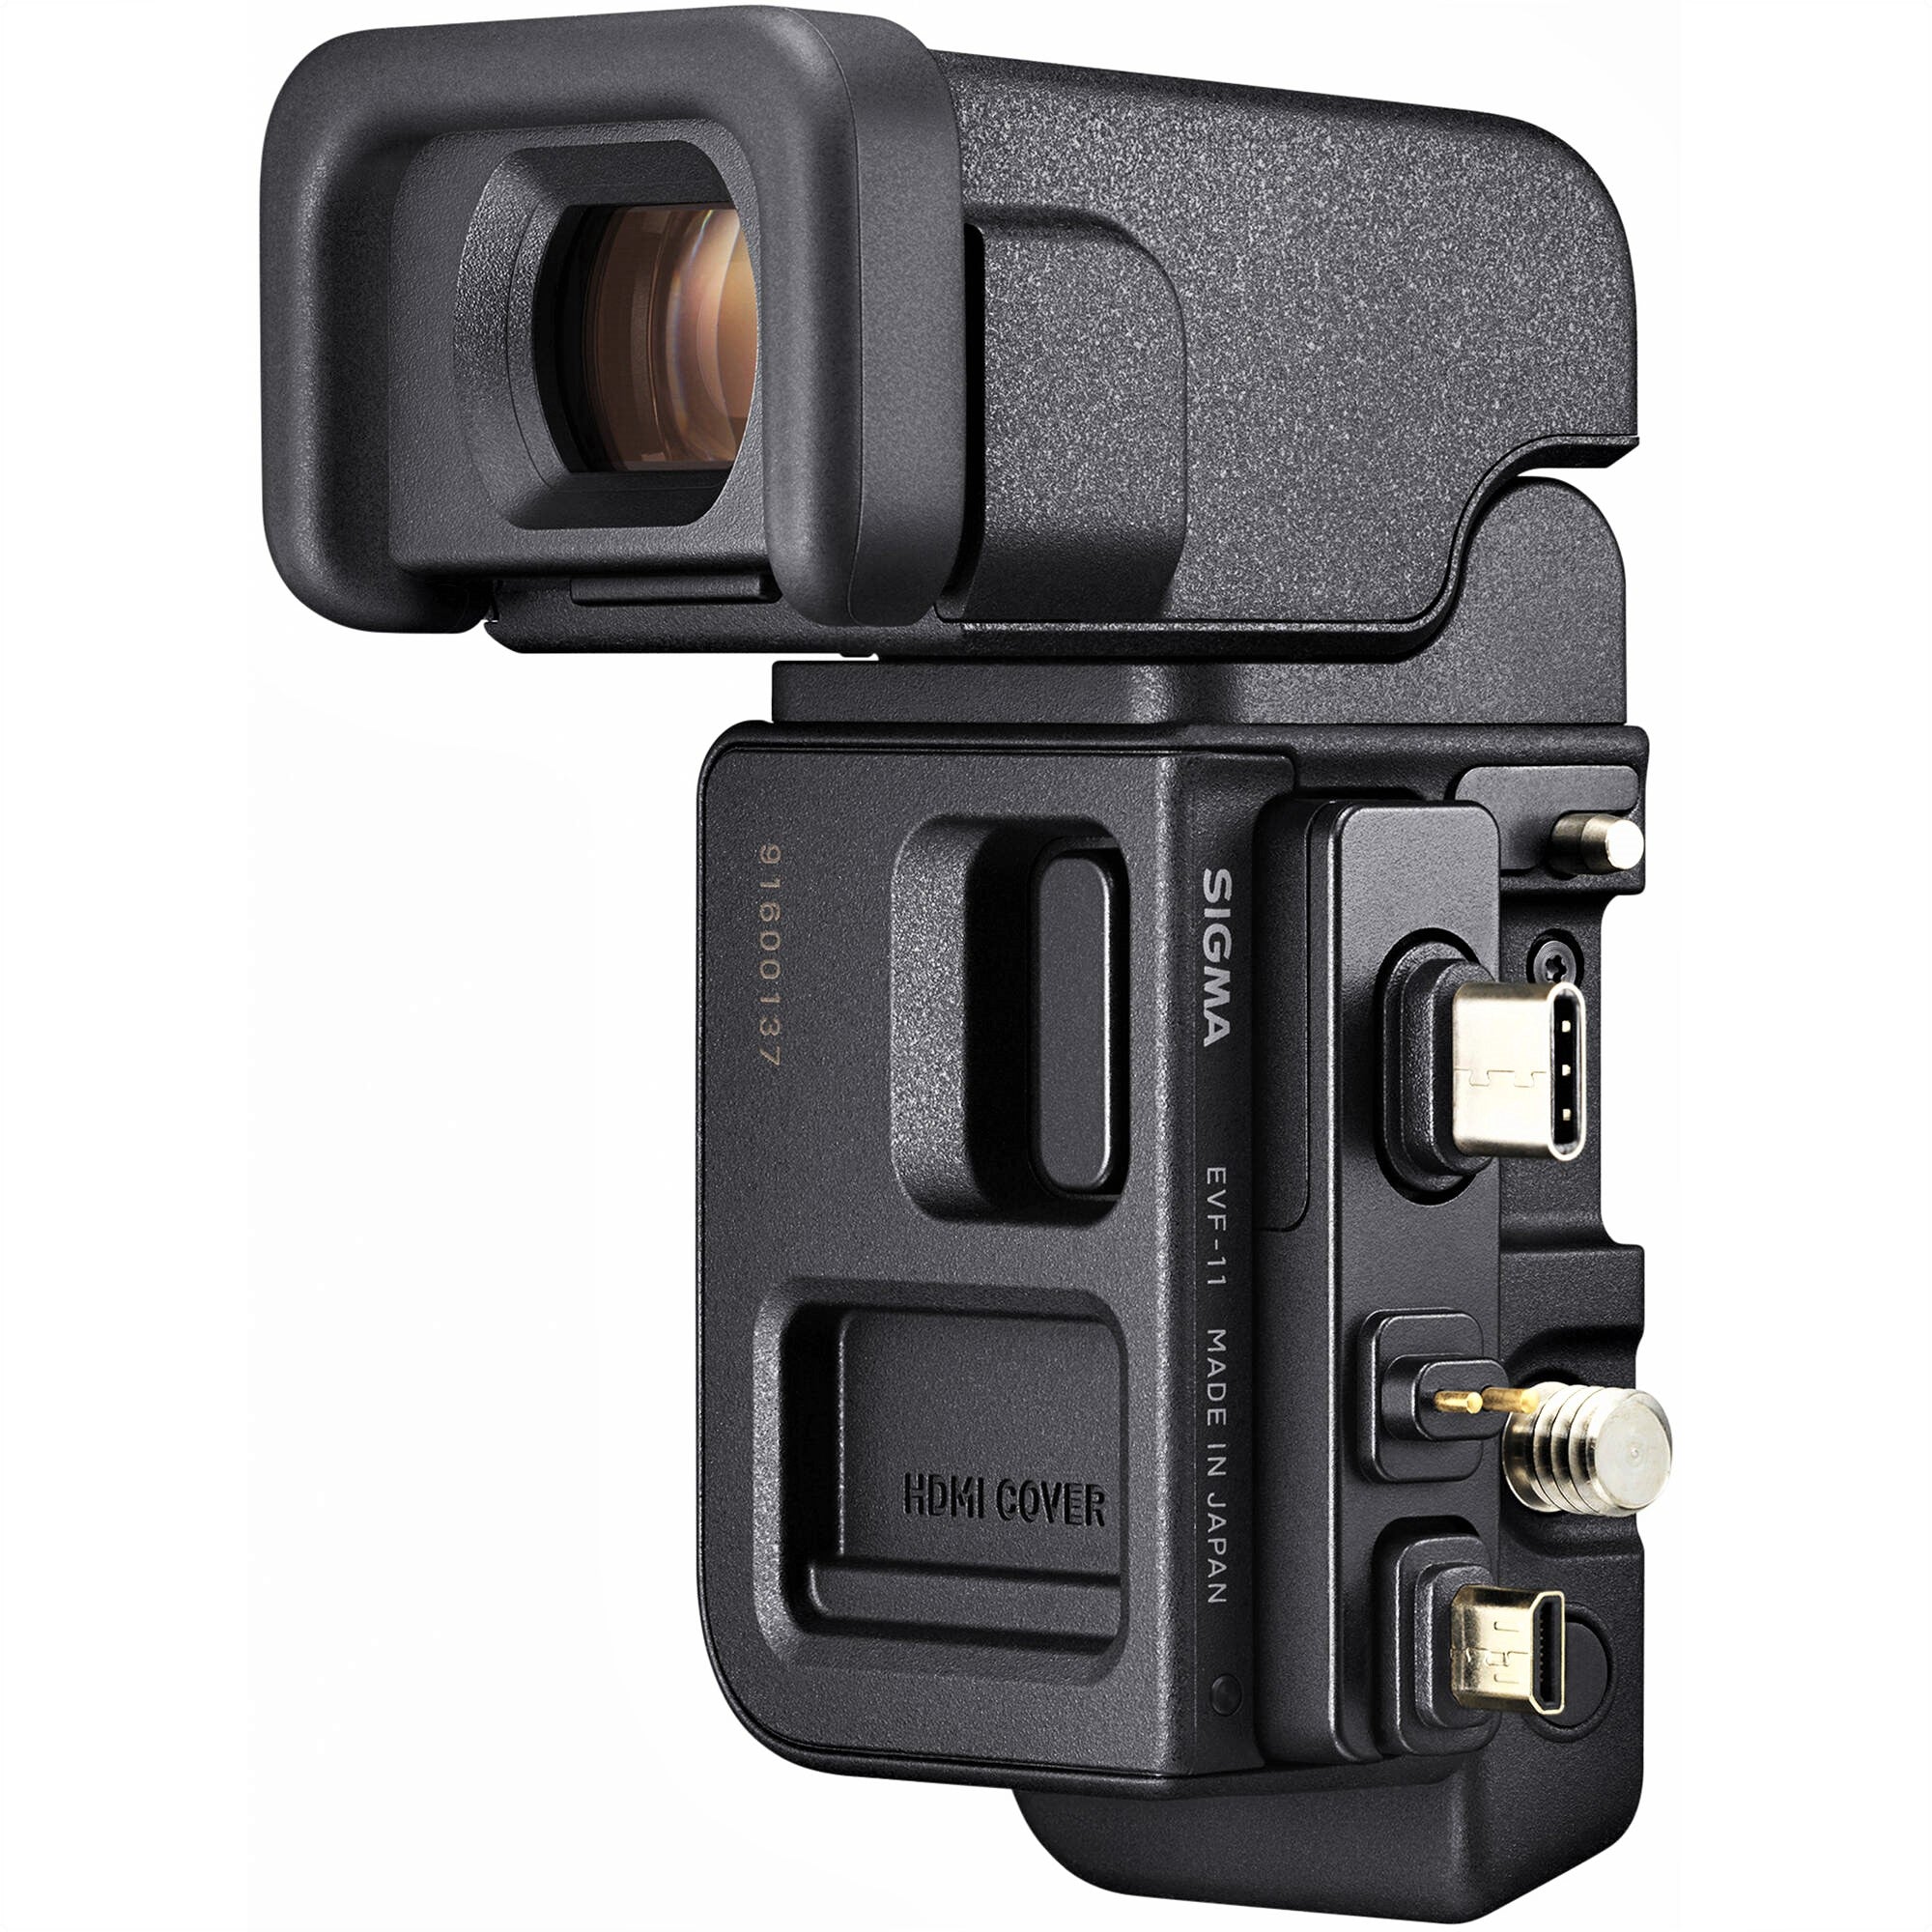 EVF-11 Electronic Viewfinder